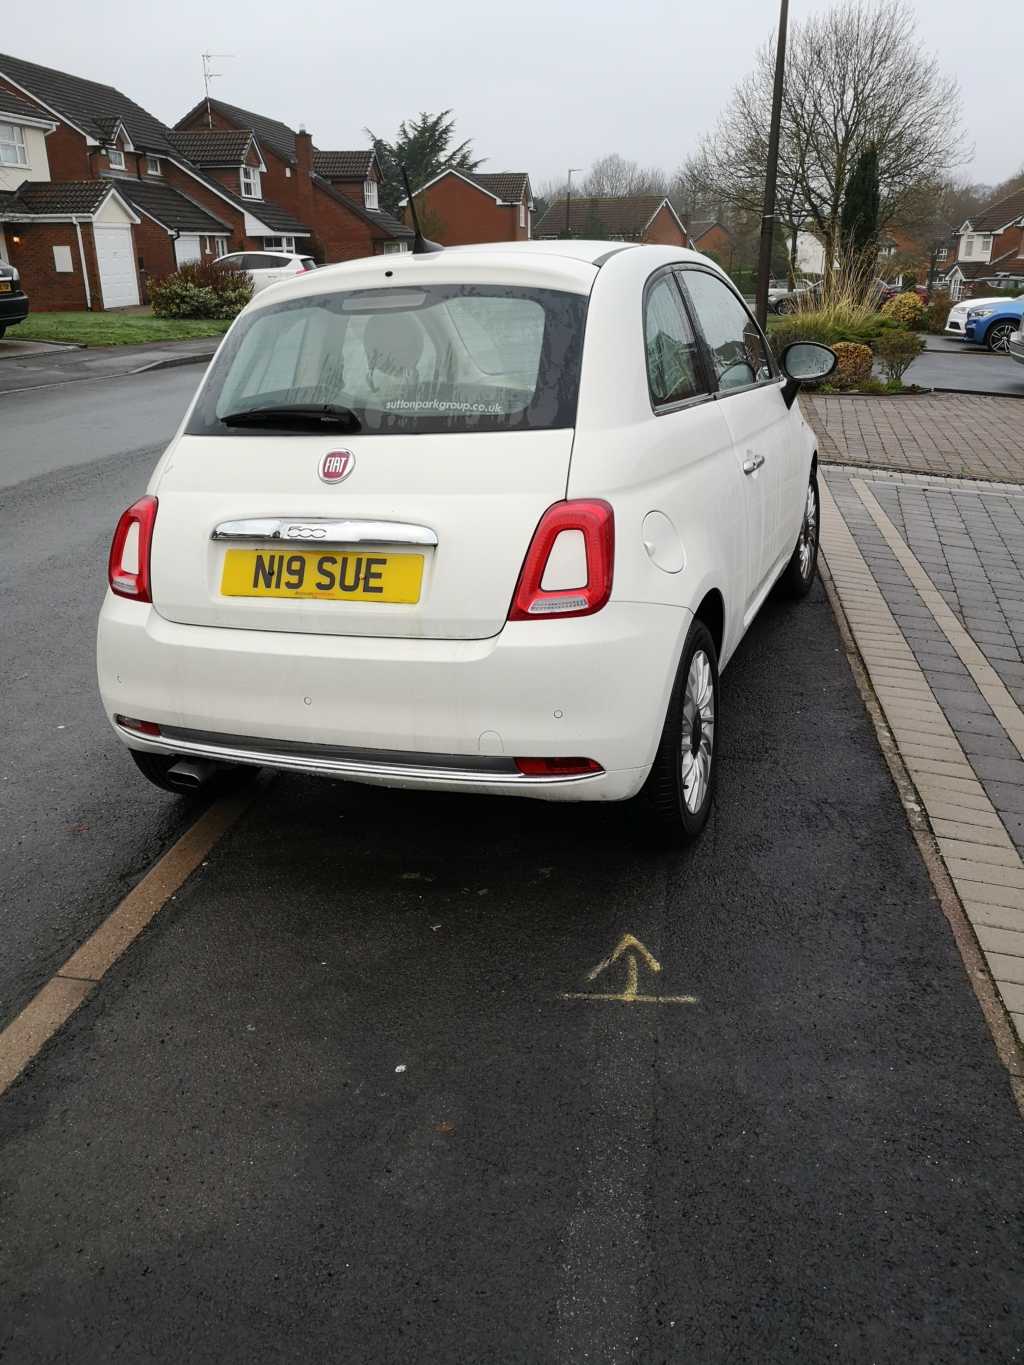 N19SUE is an Inconsiderate Parker